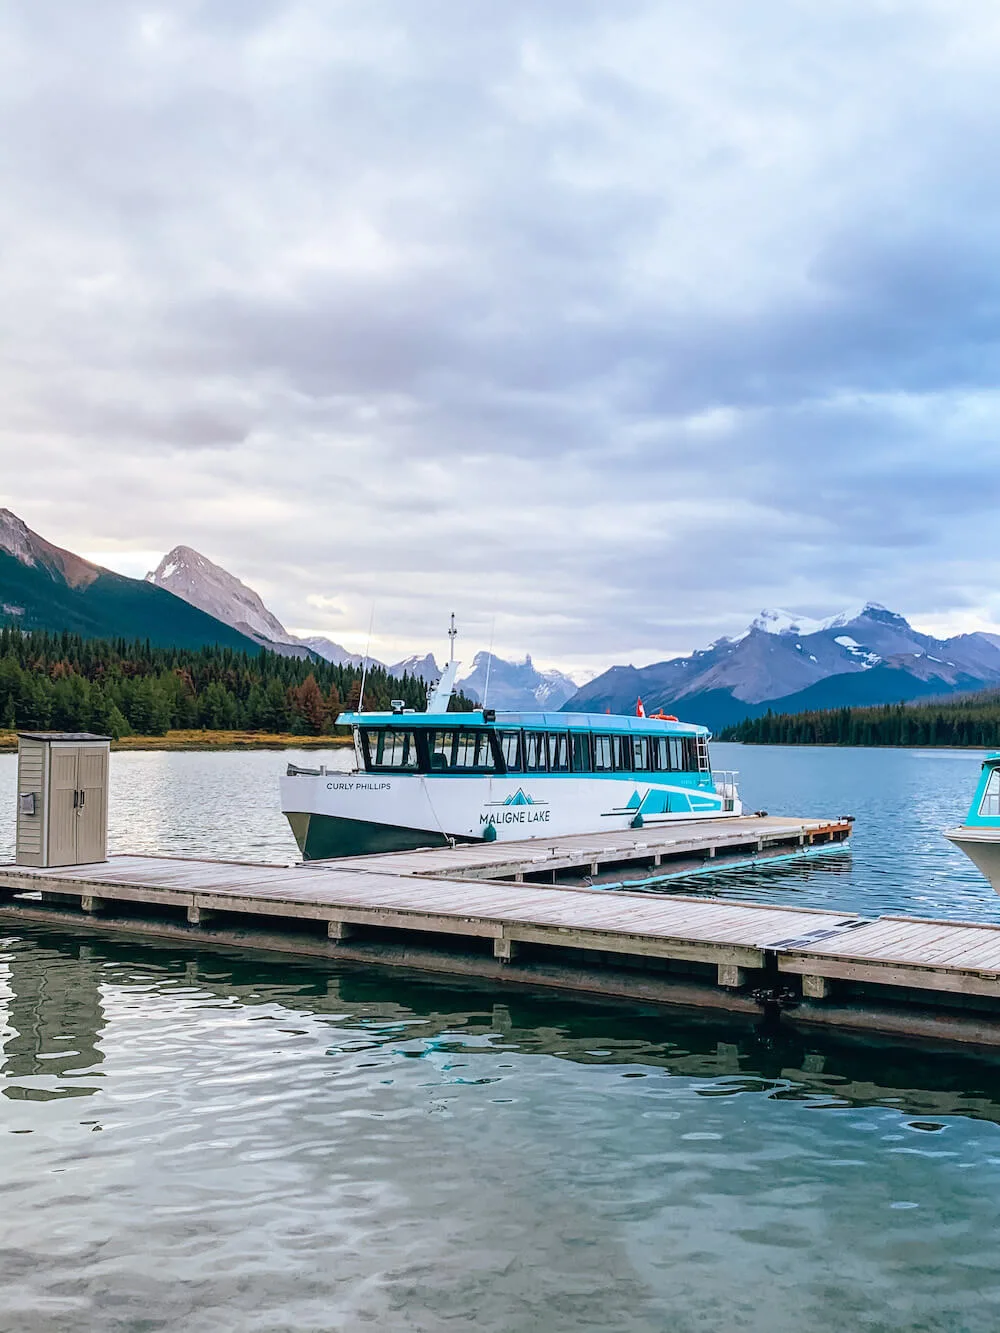 Planning a trip to Jasper National Park soon? Here's a local's guide to some of the best things to do in Jasper. From hikes and trails to adventure sports, family friendly excursions, dining experiences and more. You won't want to miss this guide of the best things to do and places to see in Jasper. Pictured here: Maligne Lake Cruise